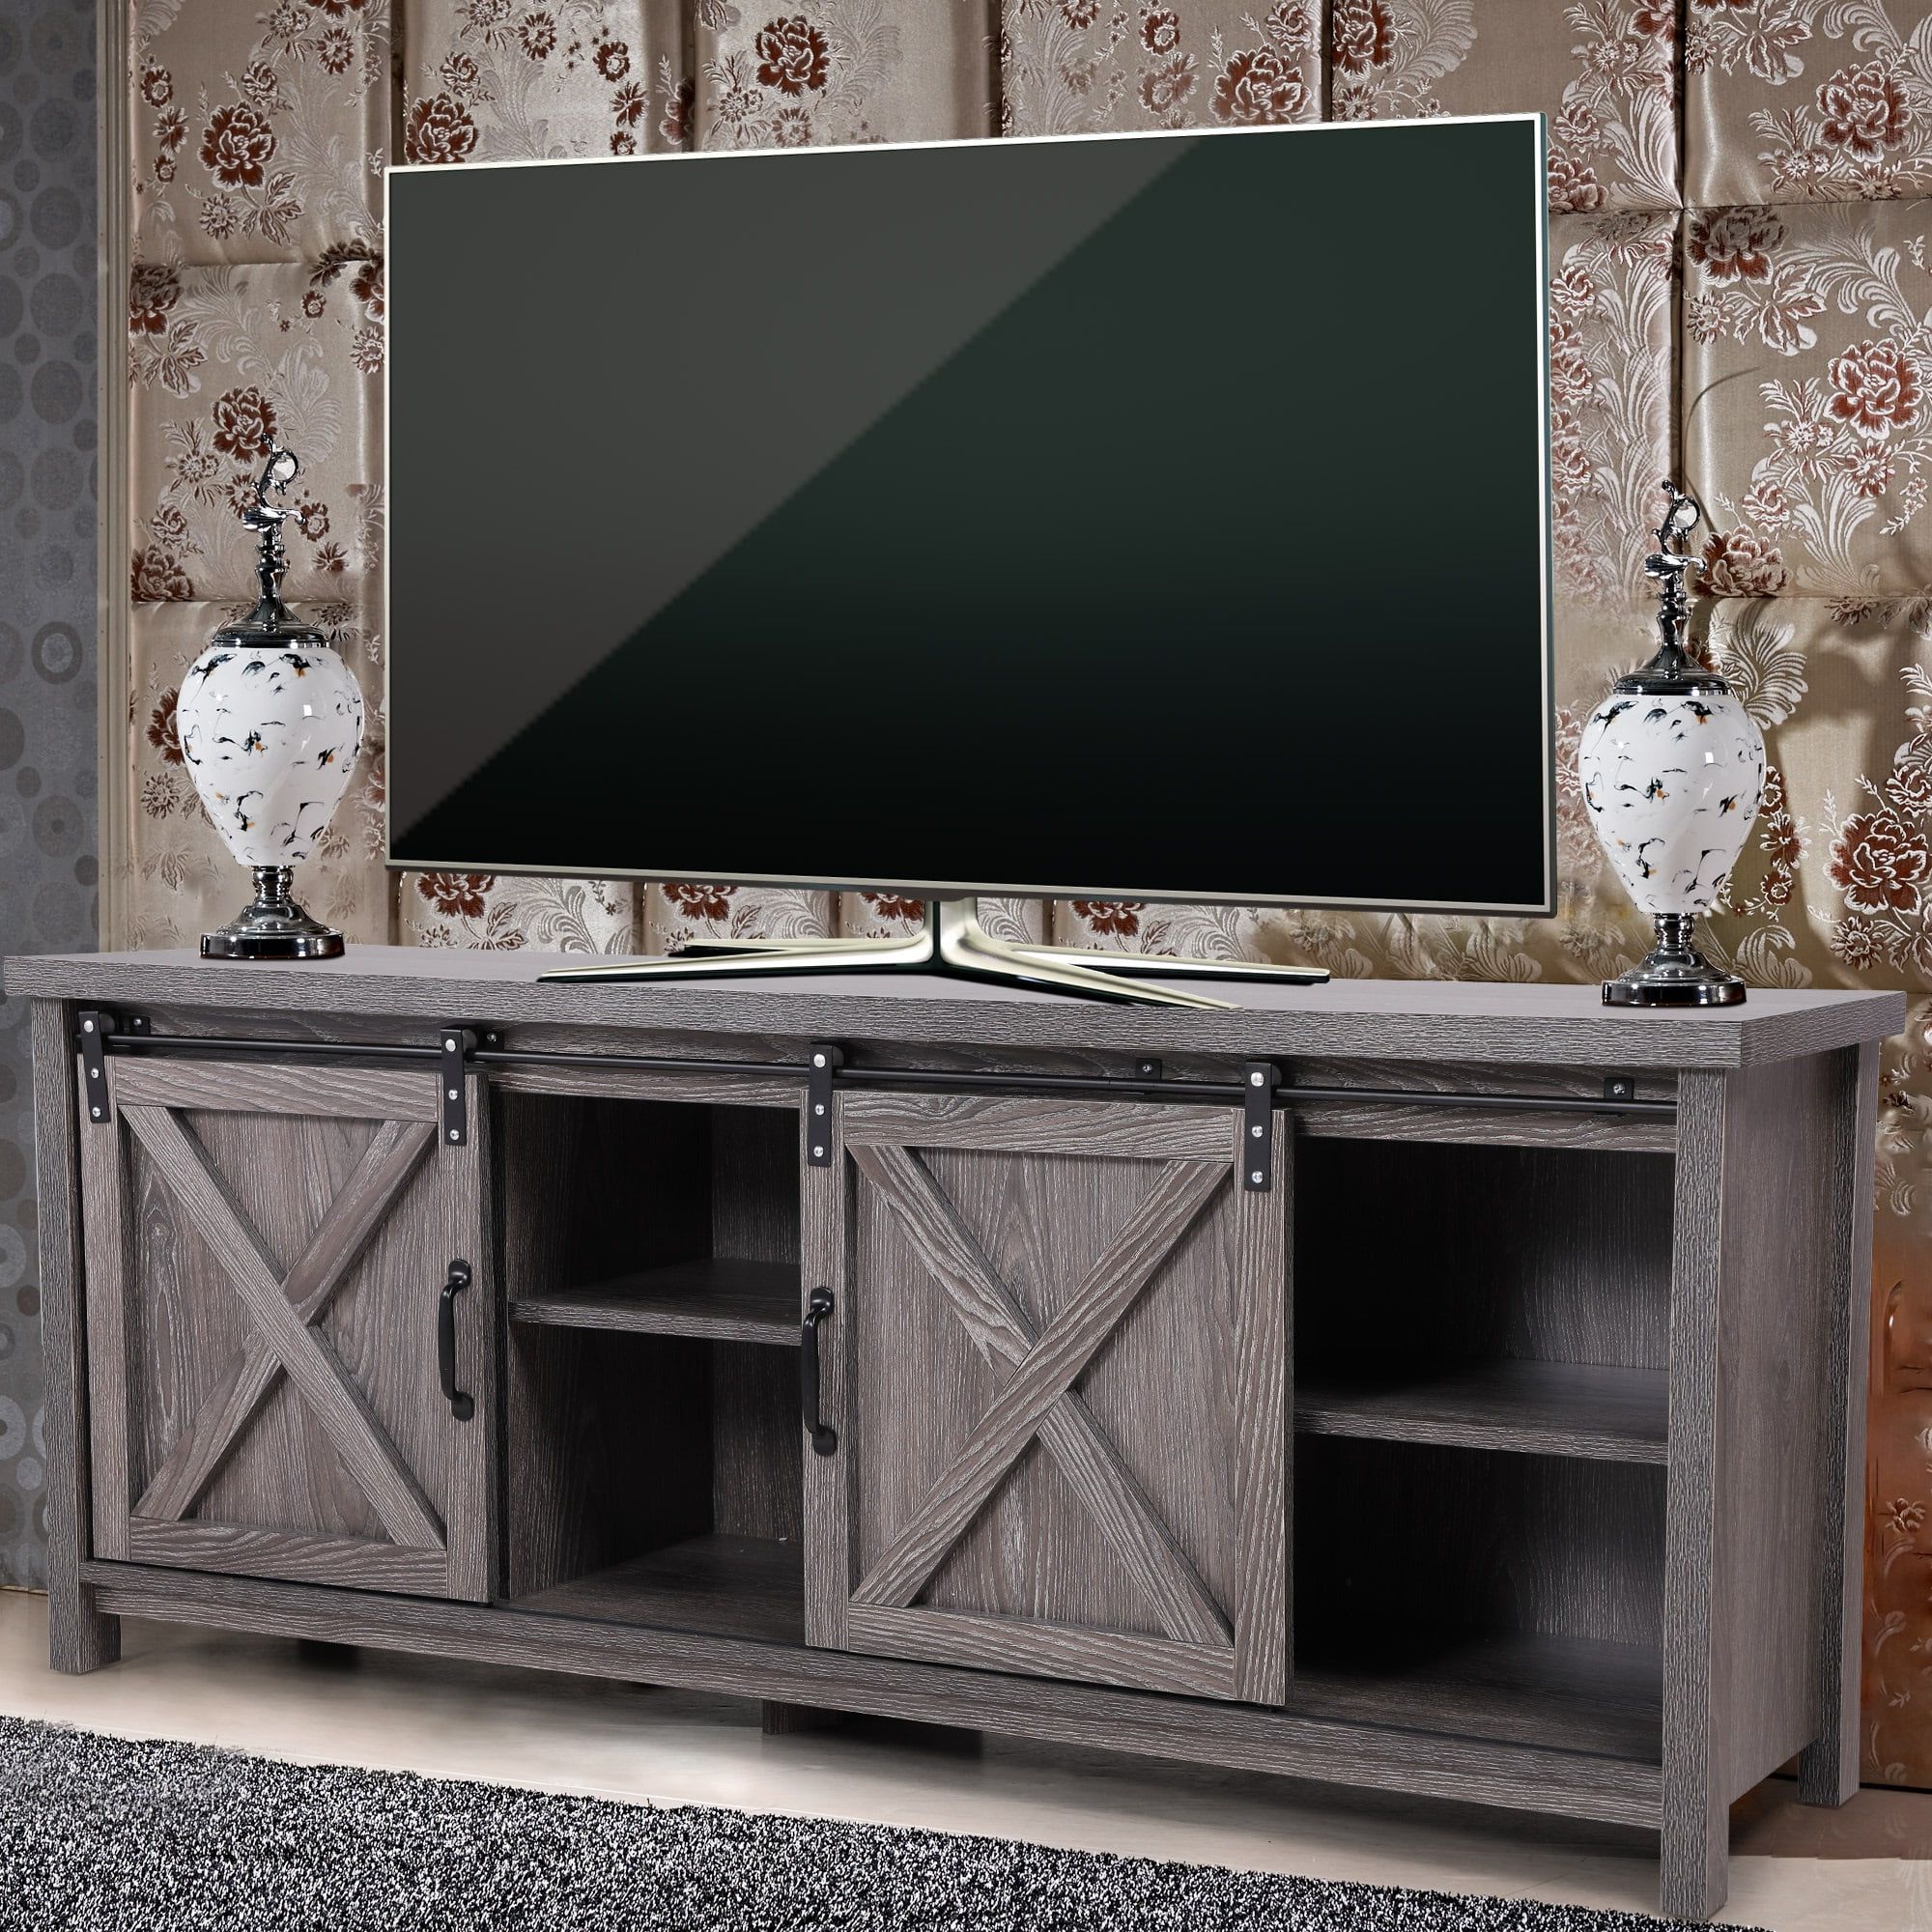 Jaxpety 58" Farmhouse Sliding Barn Door Tv Stand For Tvs Up To 65 For Most Popular Farmhouse Tv Stands (View 10 of 15)